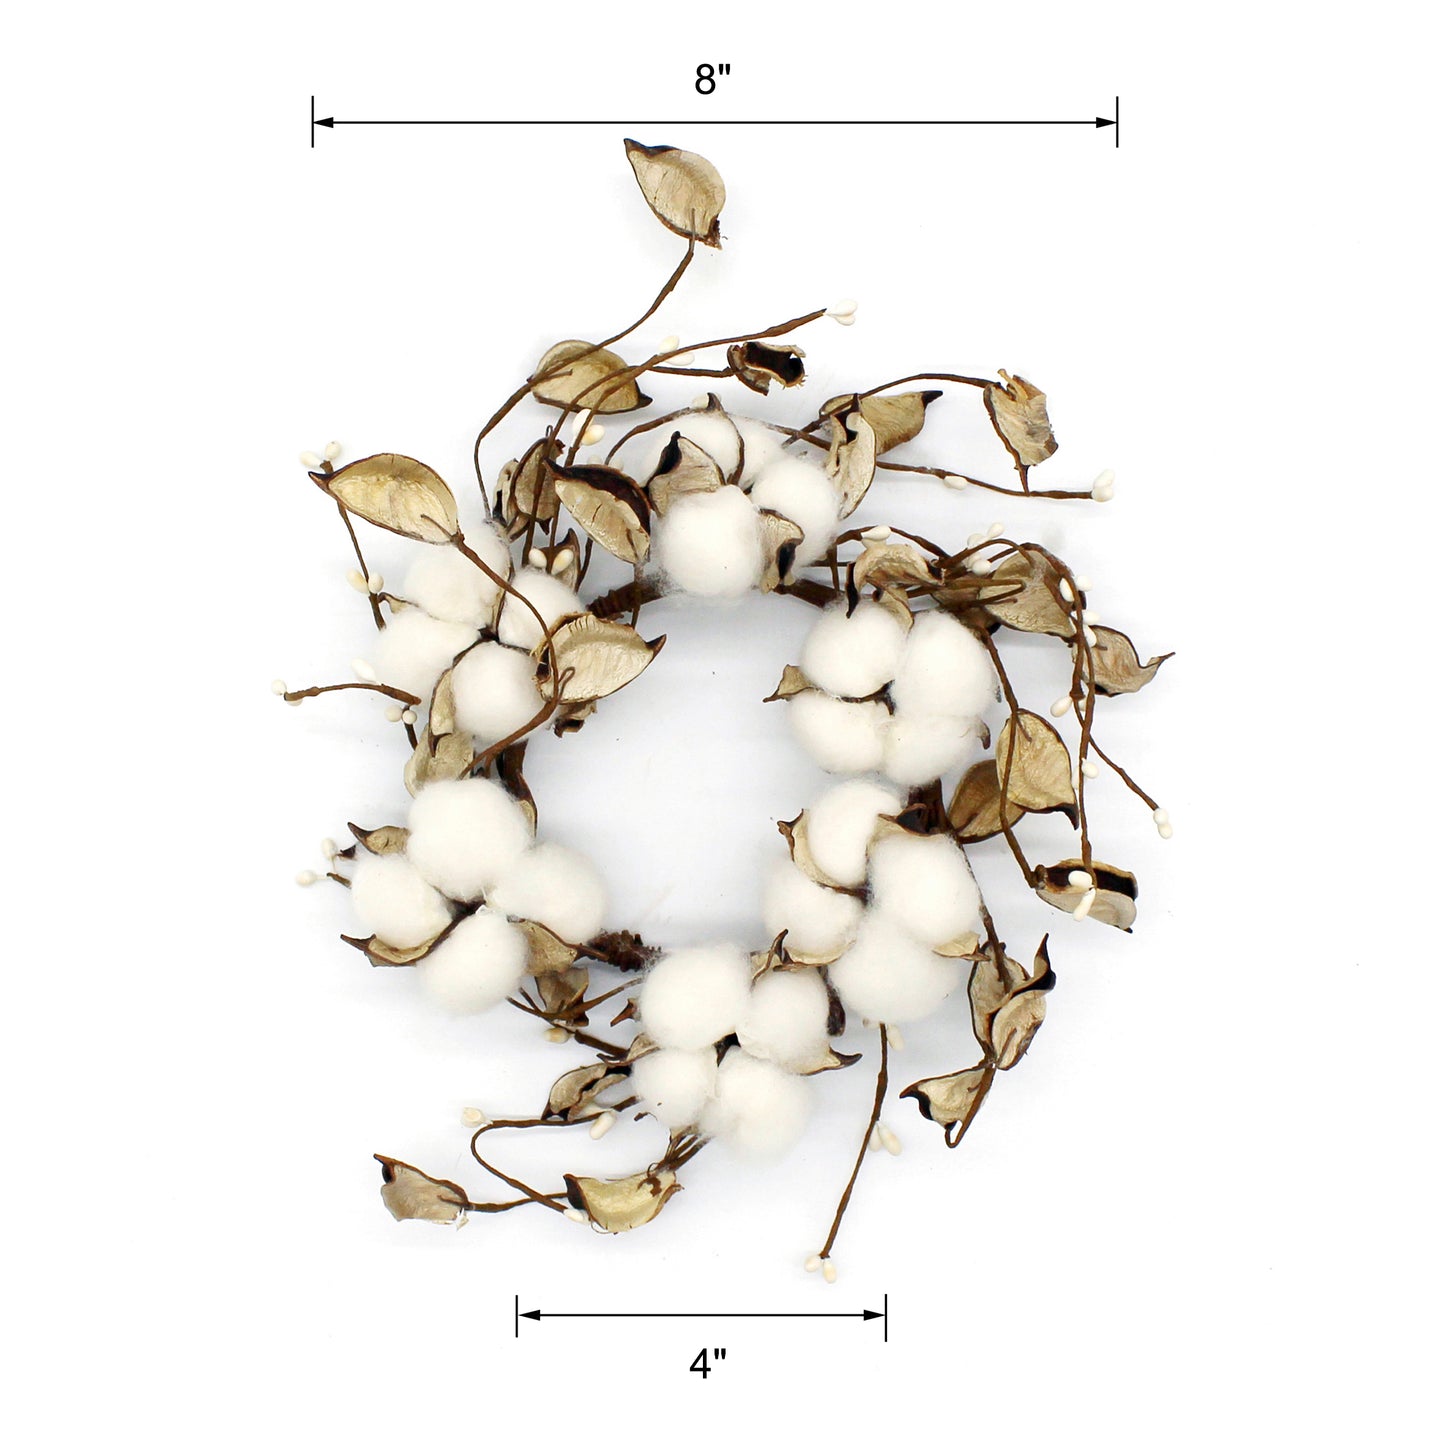 CVHOMEDECO. Primitives Rustic Cotton Pod Pip Berries with Autumn Leaves Wreath, 8 Inch